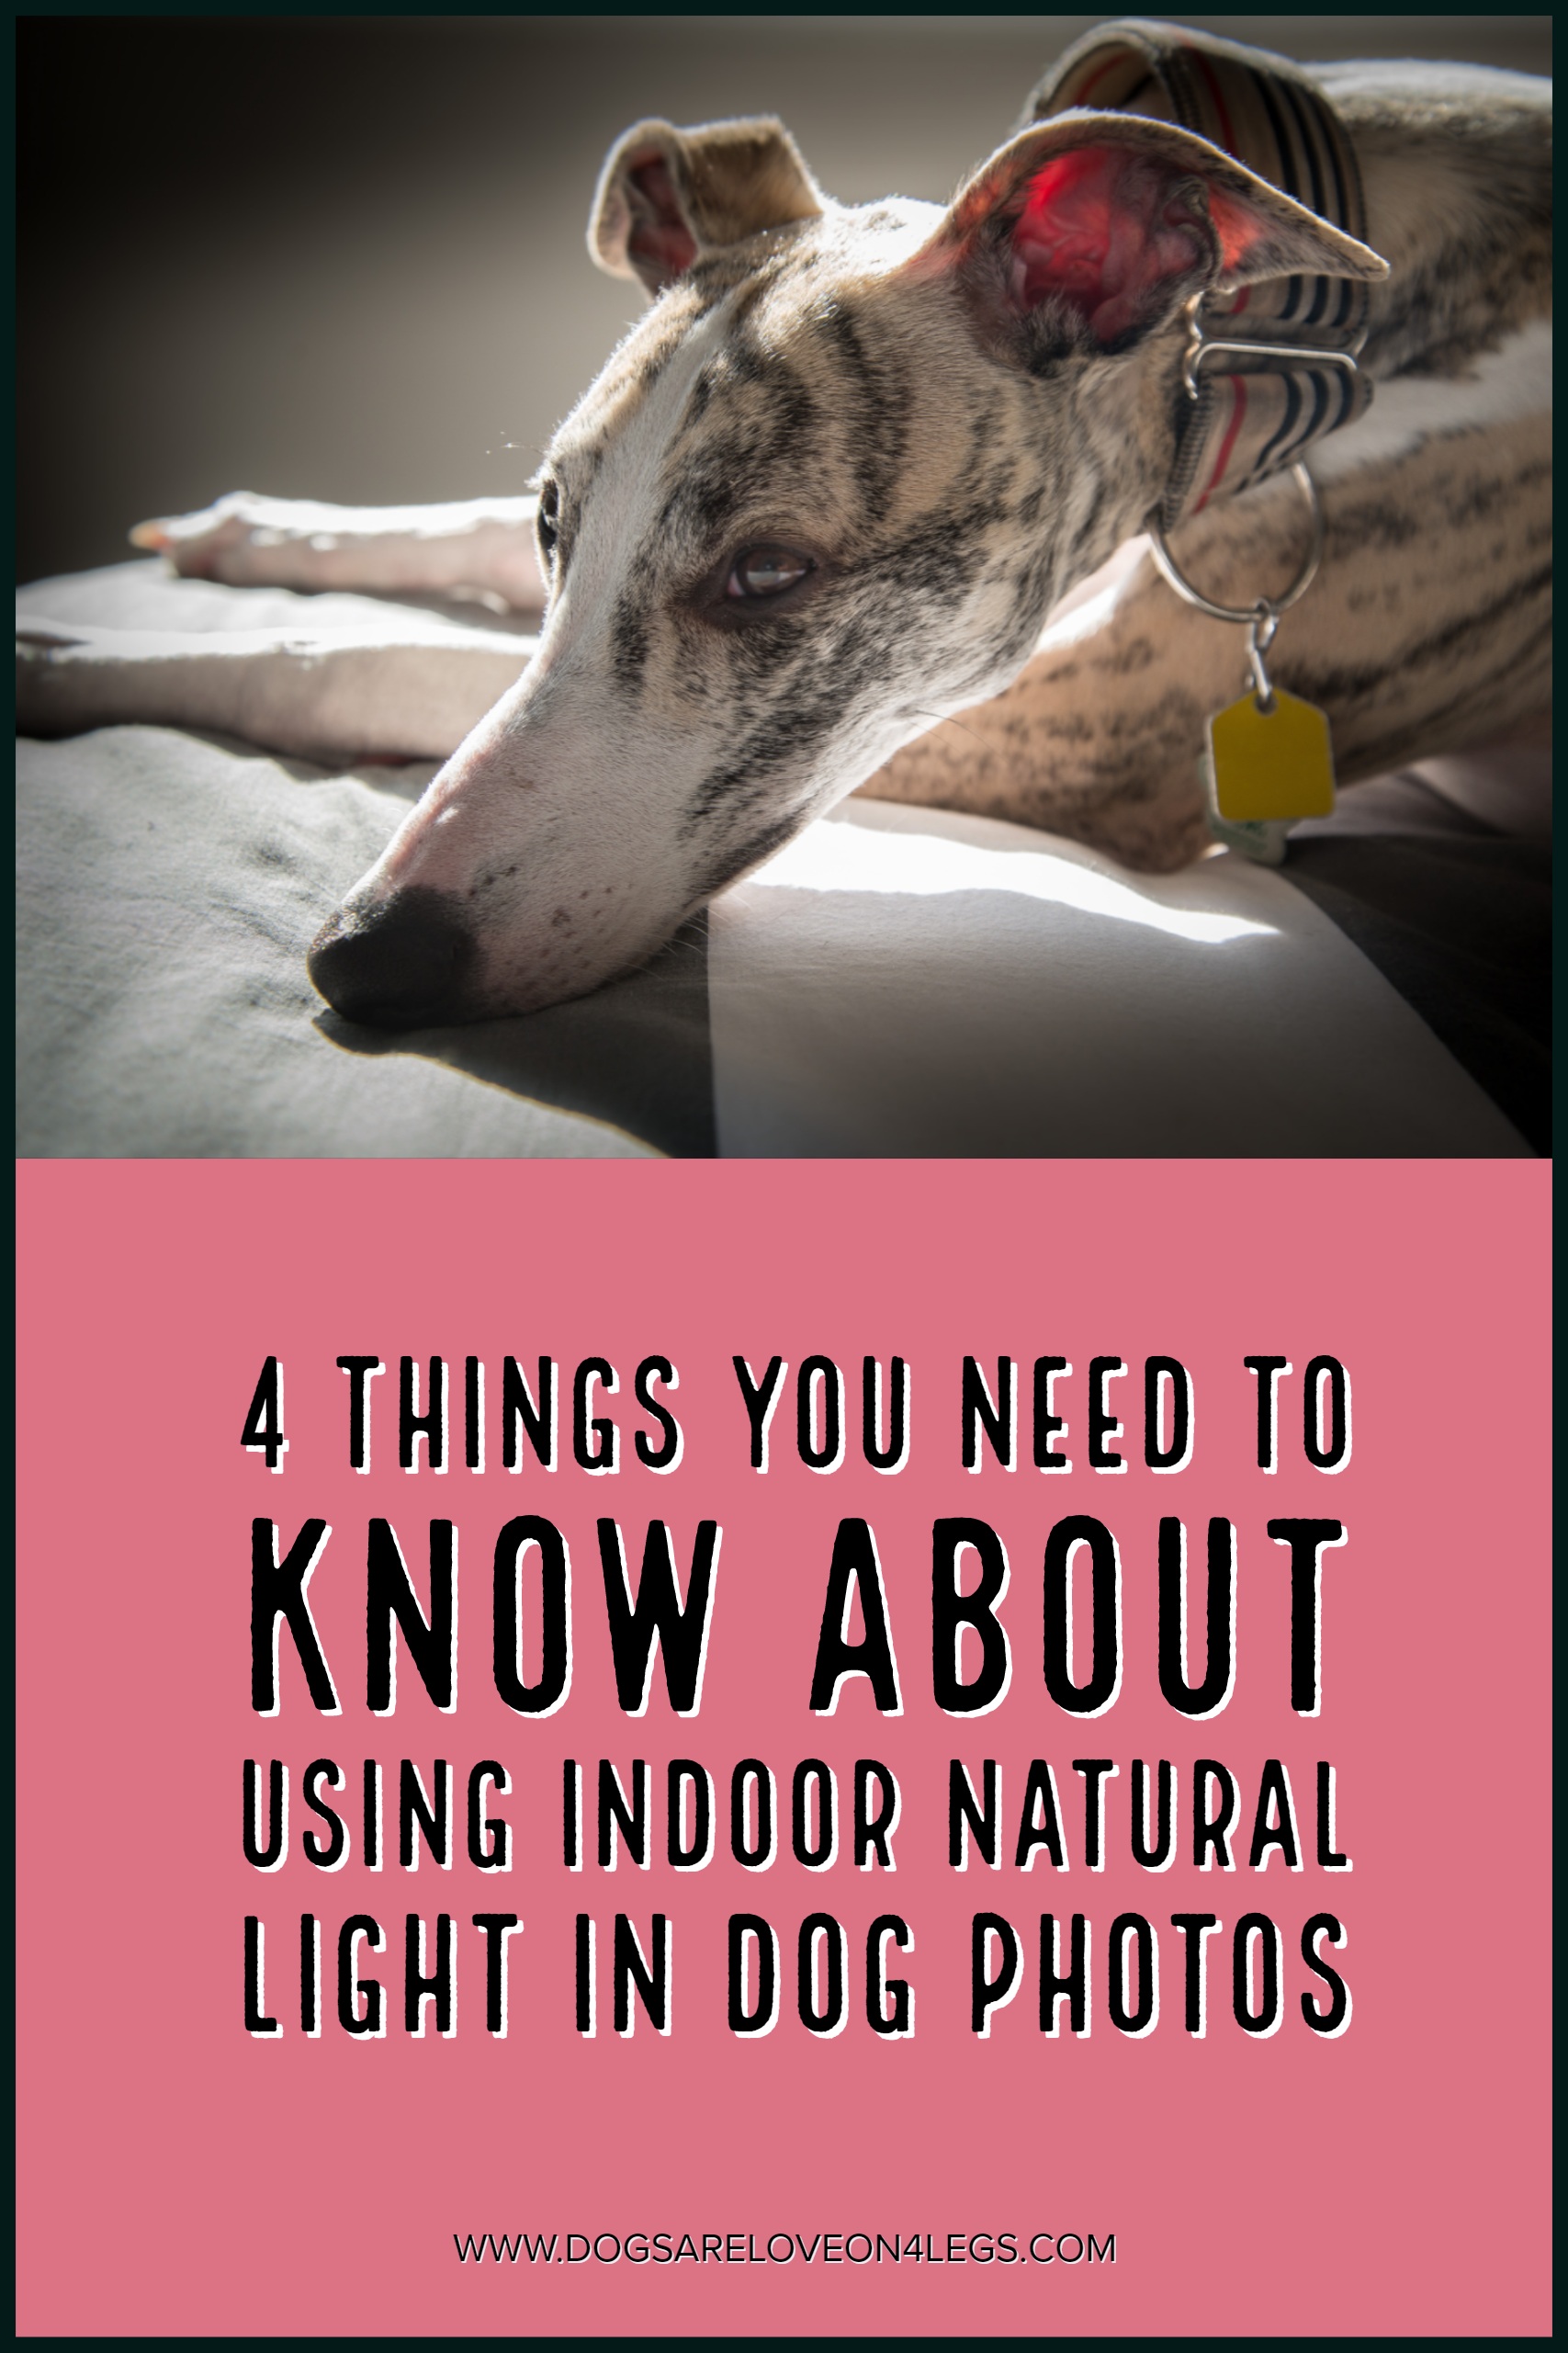 4 Things You Need To Know About Using Indoor Natural Light In Dog Photos